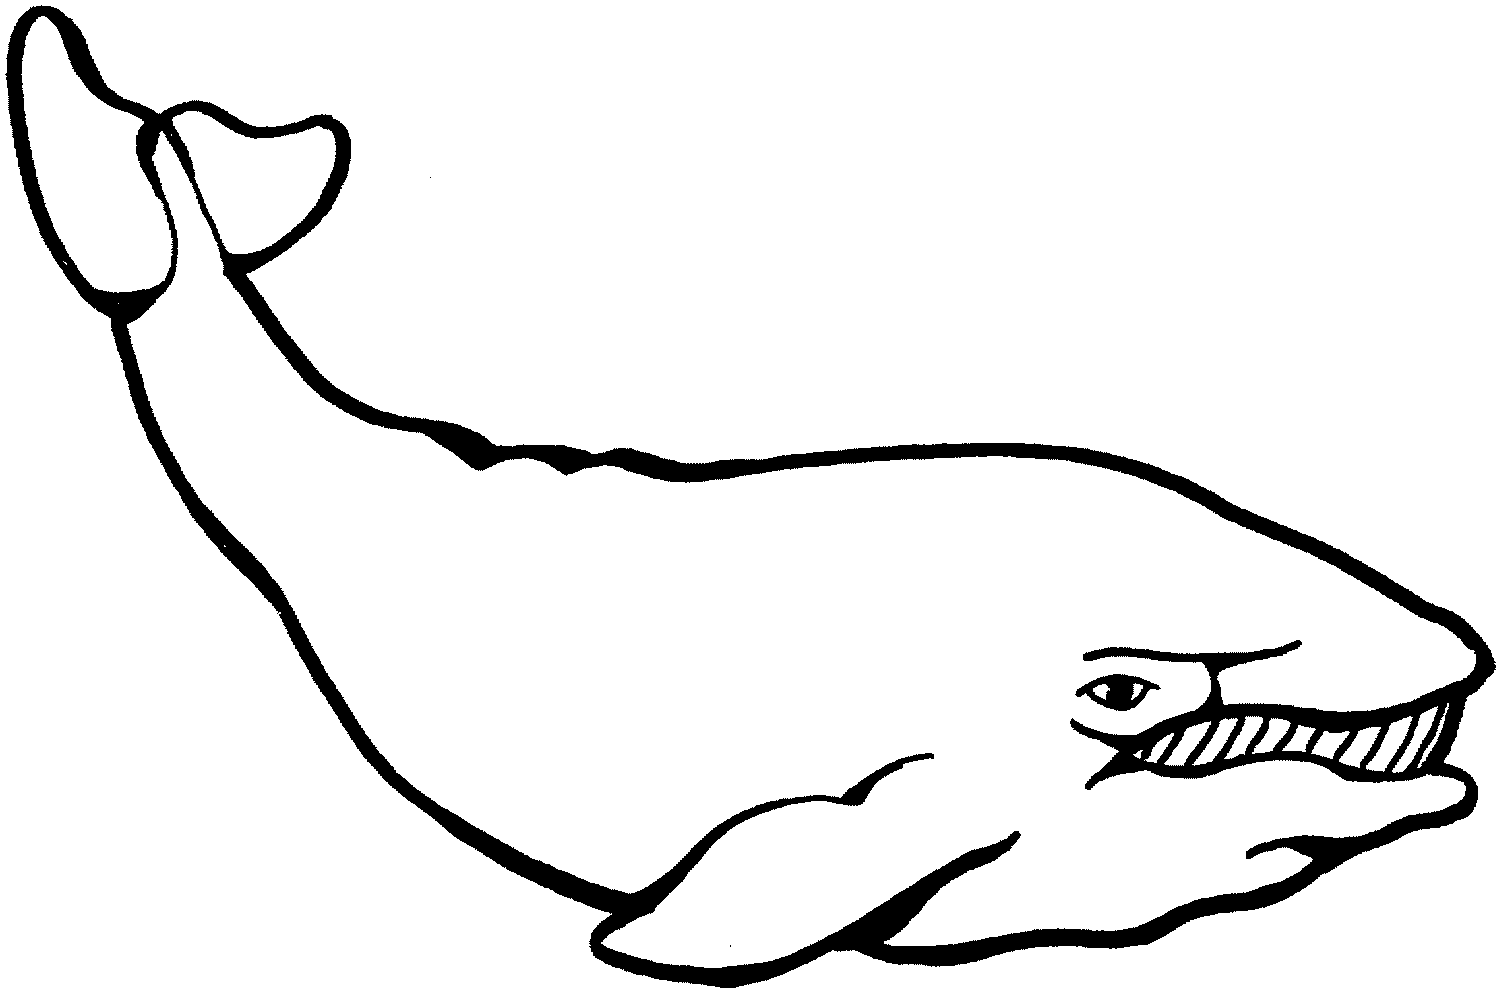 Whale coloring pages for kids - Coloring Pages & Pictures - IMAGIXS